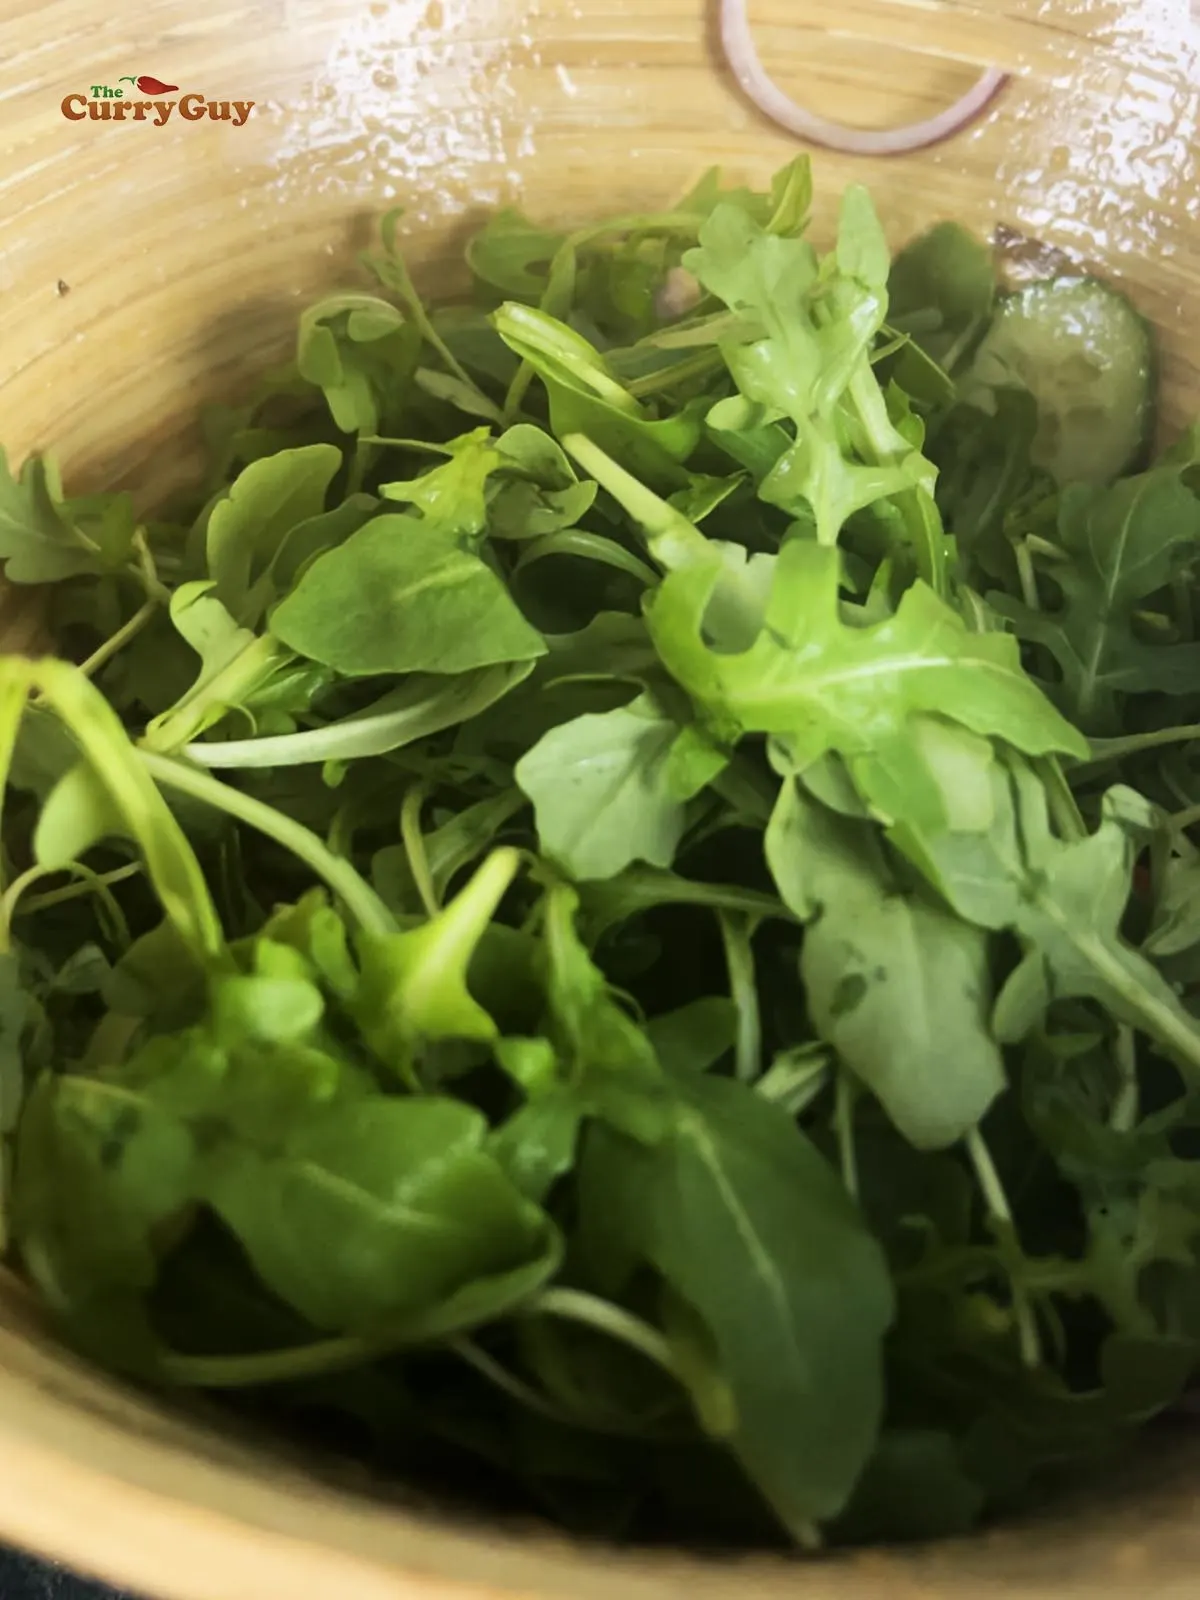 Adding the leafy greens to the salad